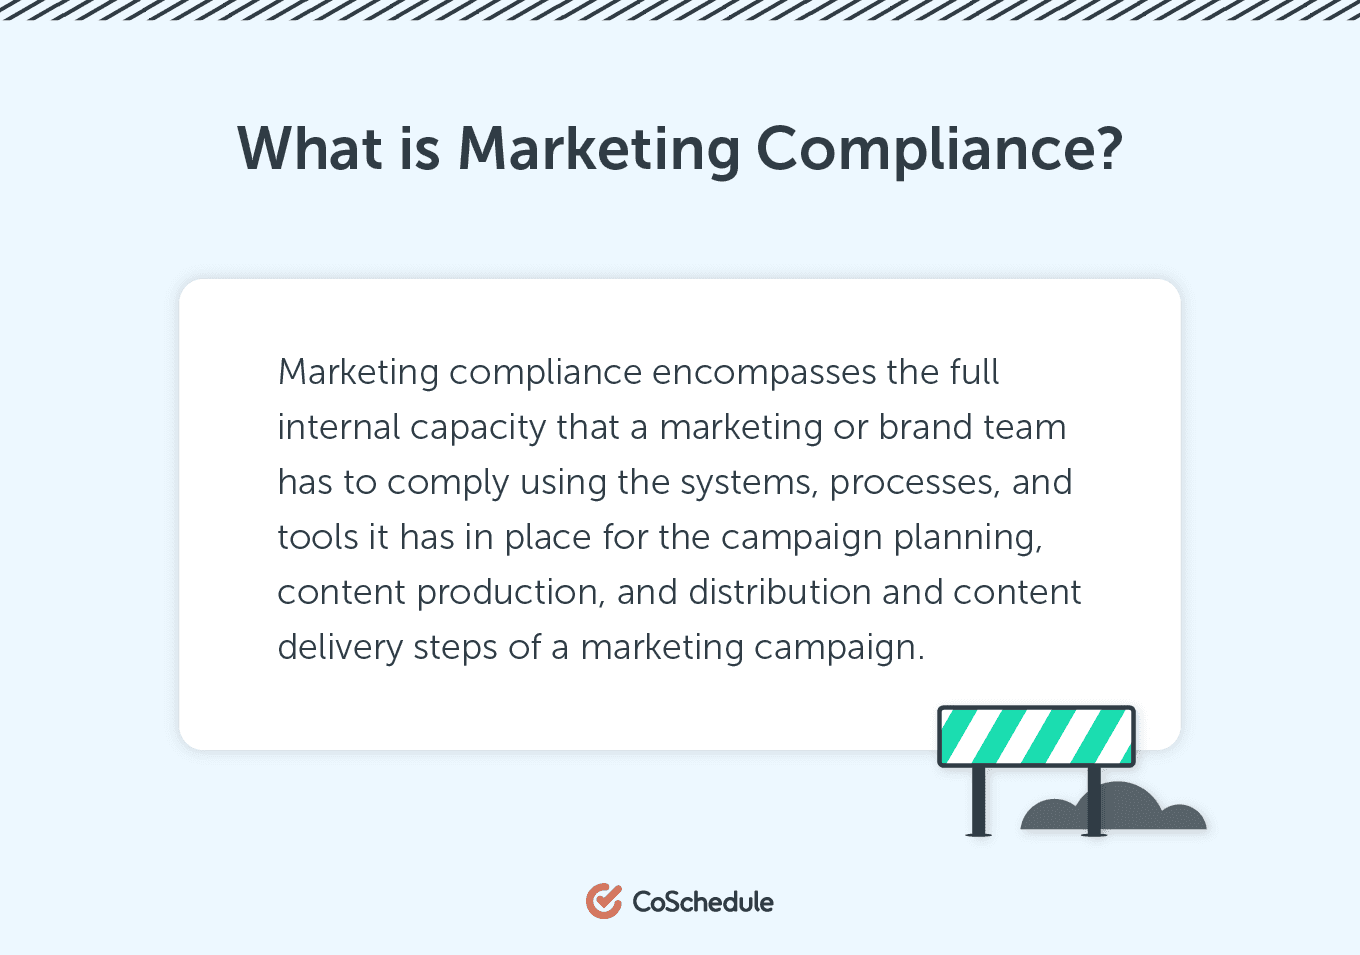 Definition of Marketing Compliance